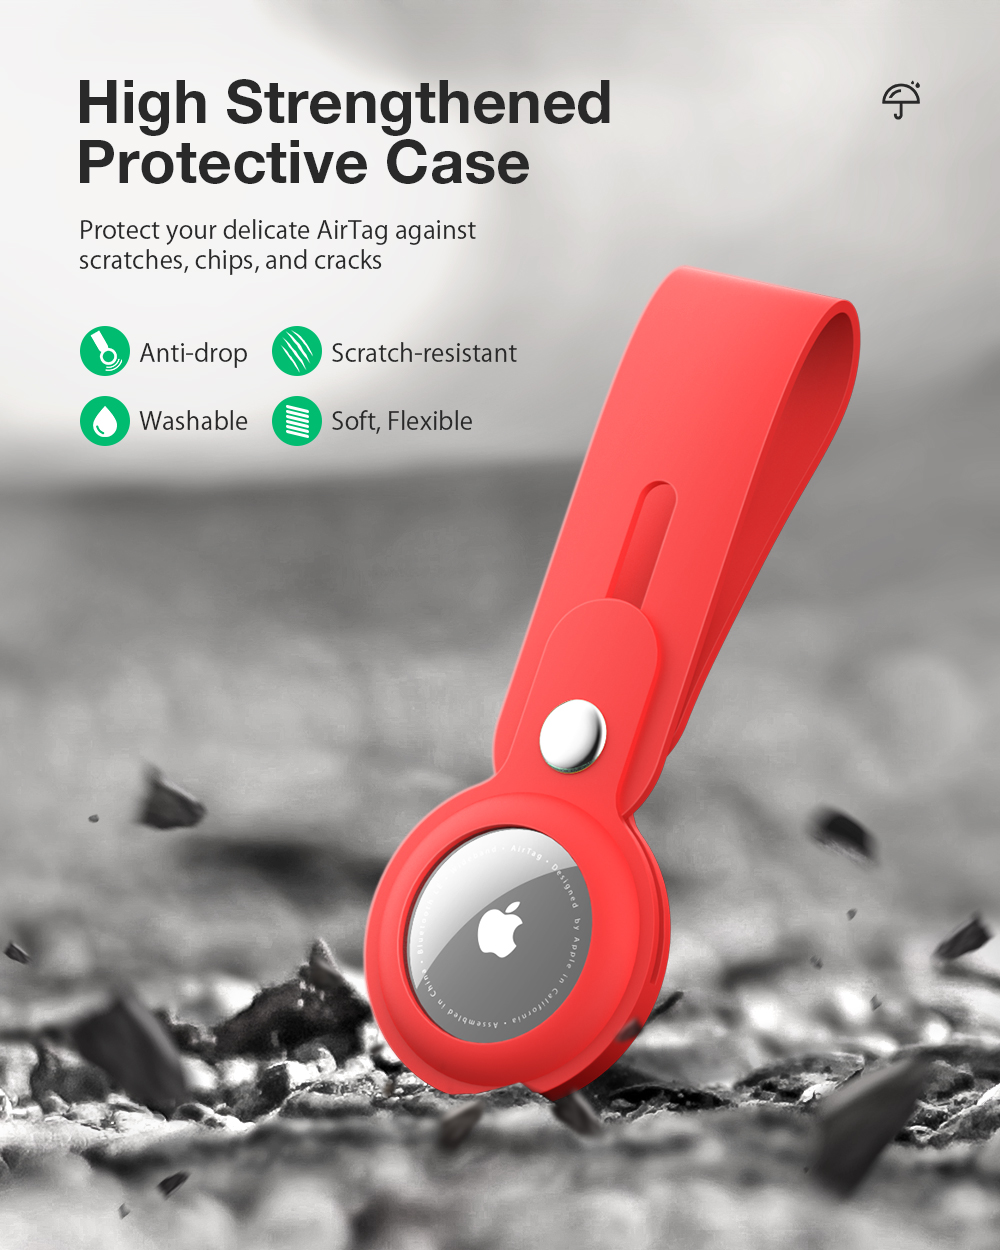 BlitzWolf®BW-TR1 Portable Pure Liquid Silicone Protective Cover Sleeve with Keychain for Apple Airtags bluetooth Tracker